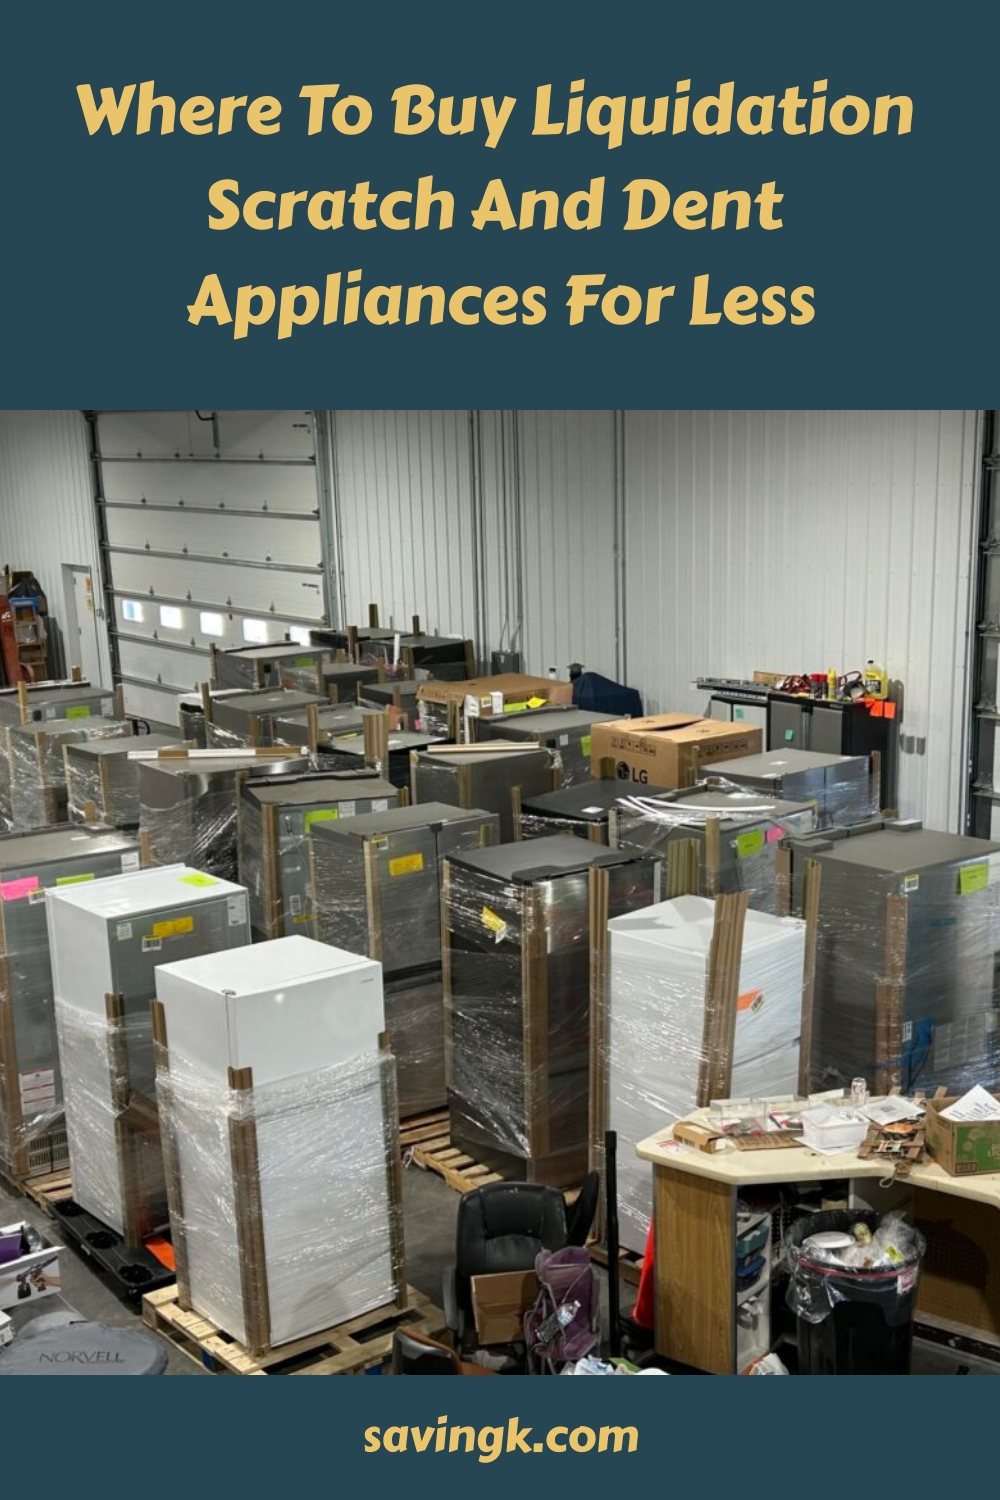 Where To Buy Liquidation Scratch And Dent Appliances